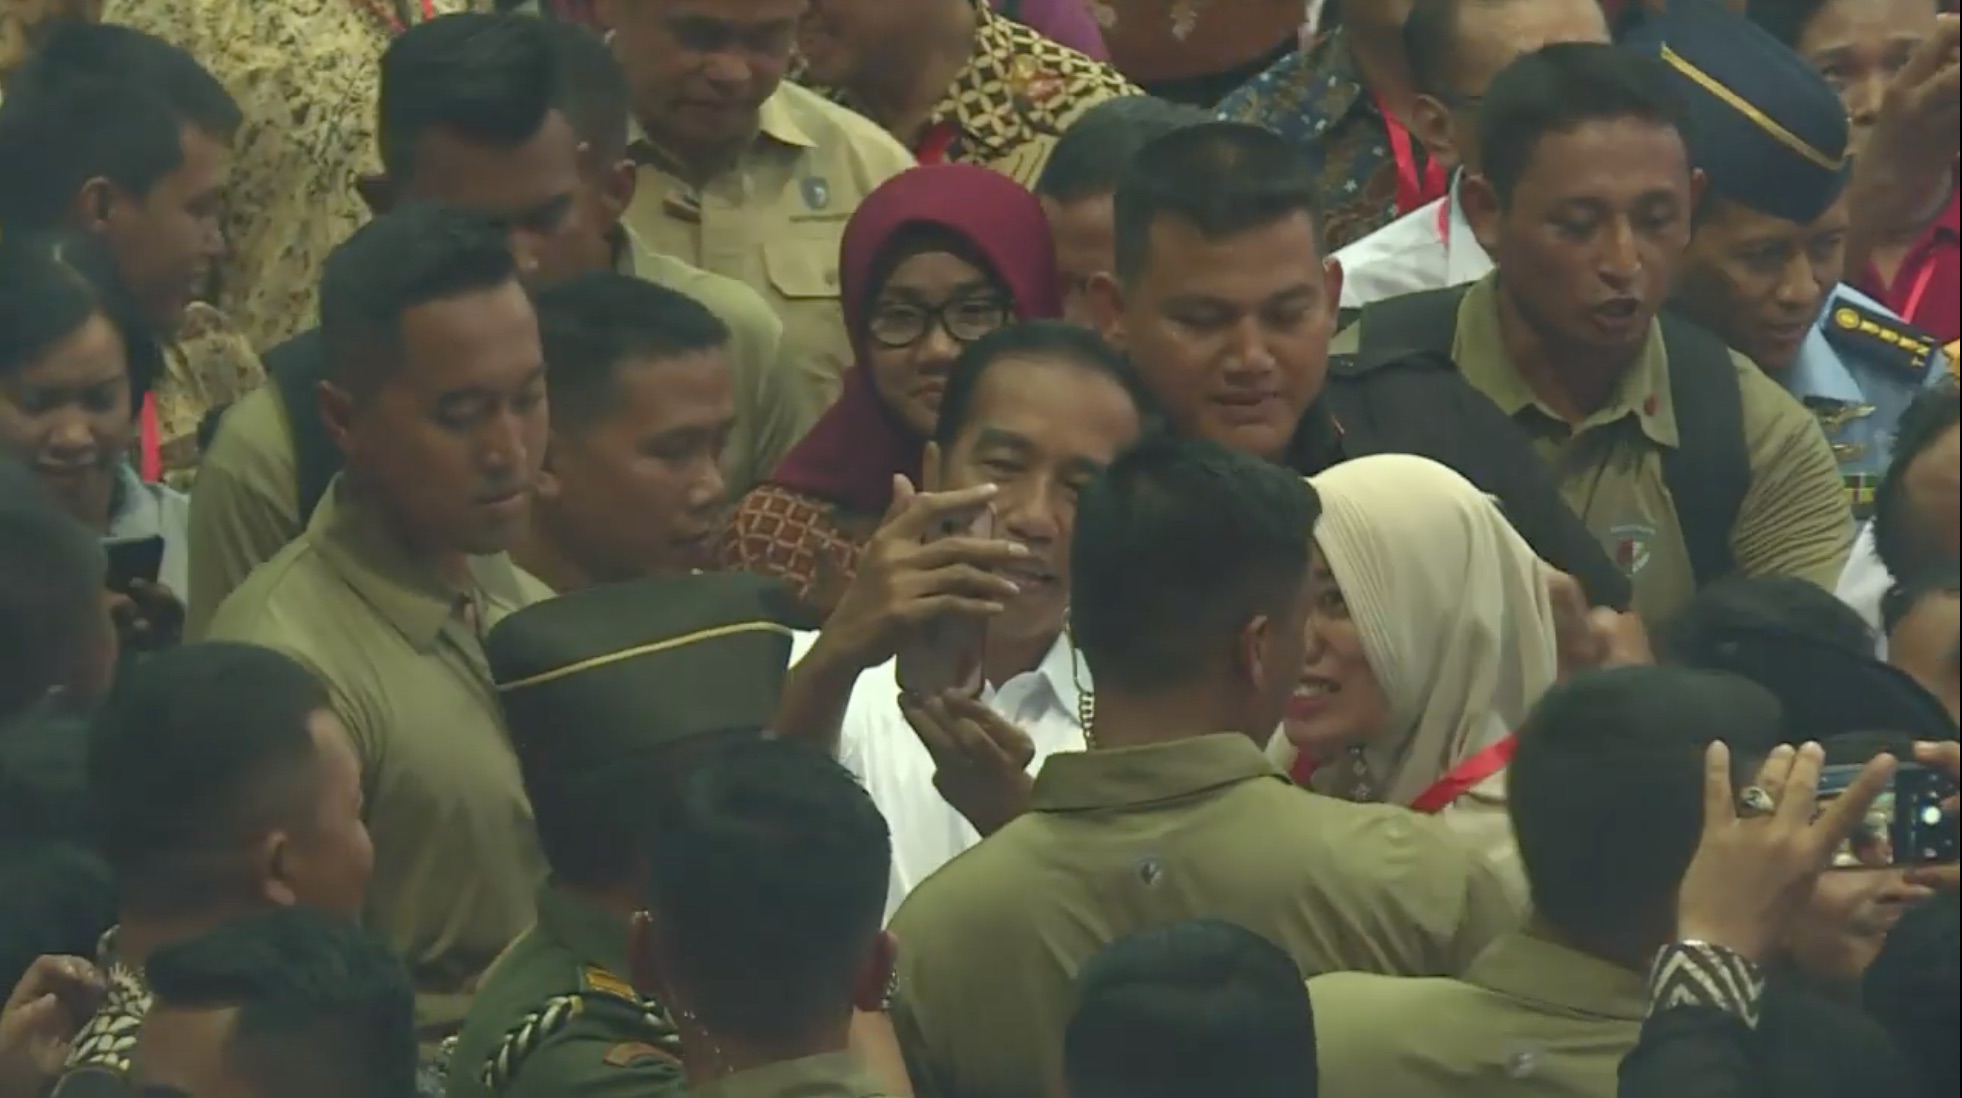 Joko Widodo poses for photos with his adoring female fans. (Photo: YouTube screengrab / AFP)